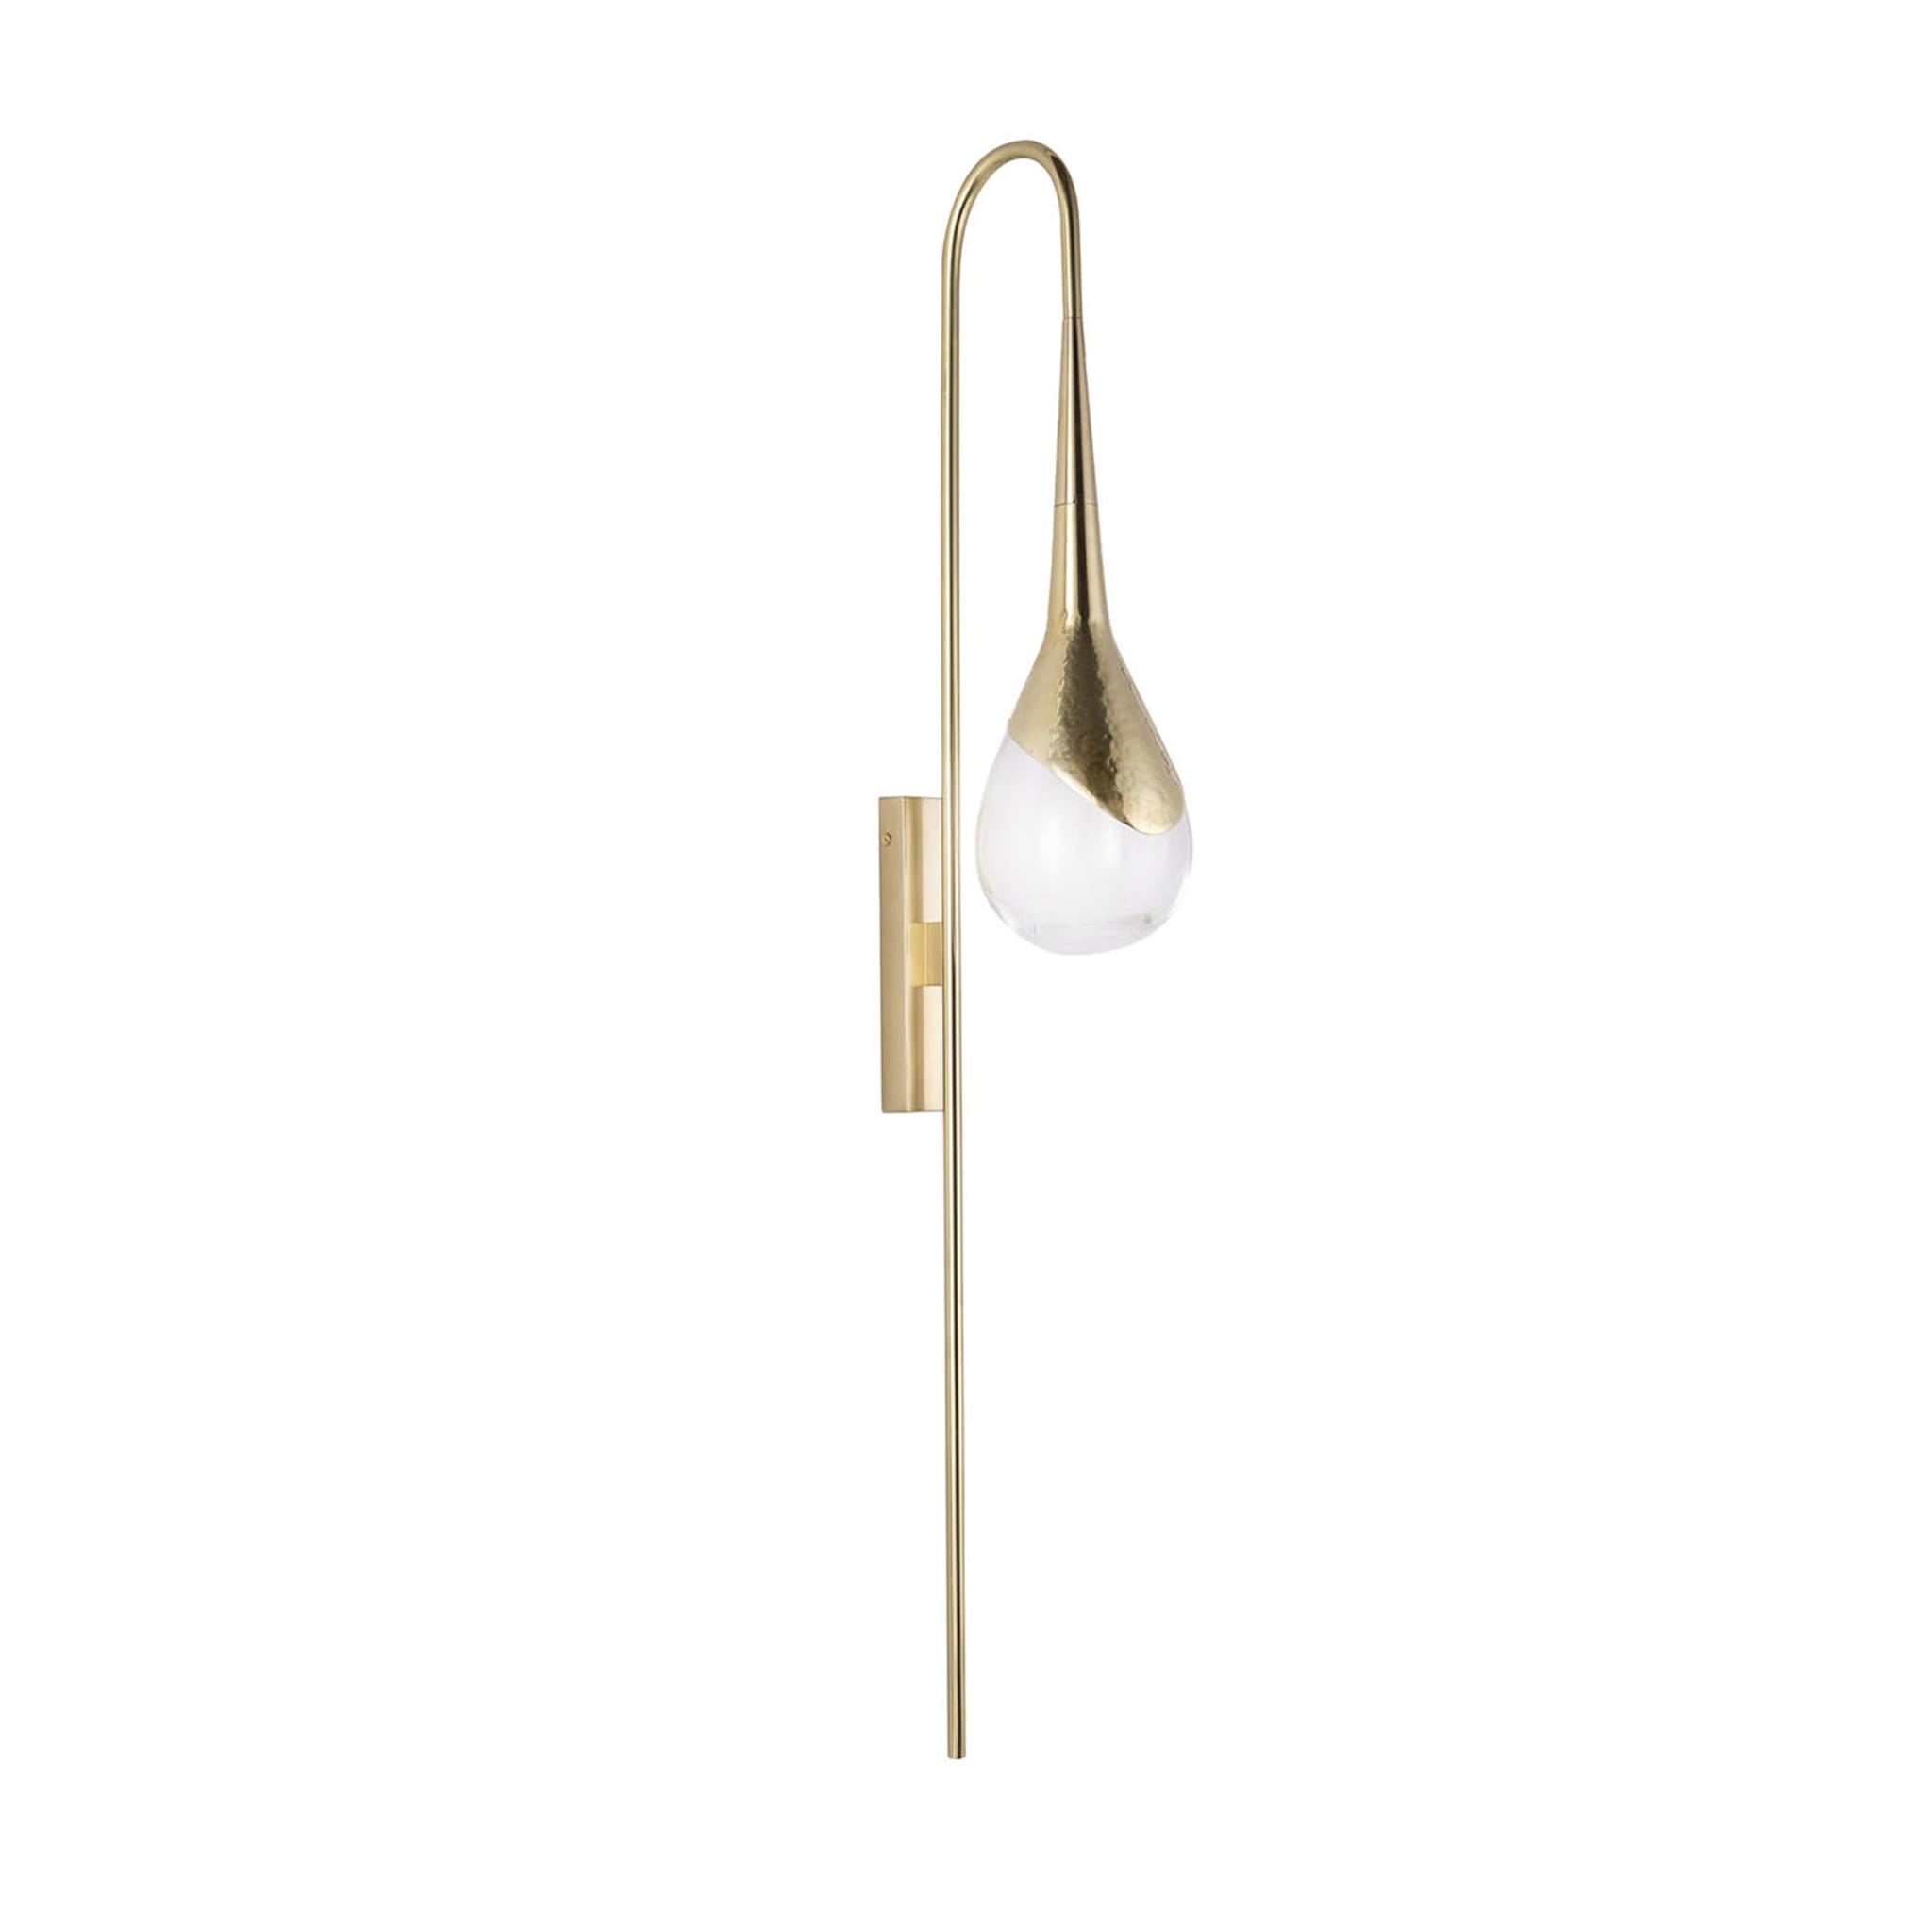 Perpetua Wall Sconce in Brass Hammered Texture - Main view